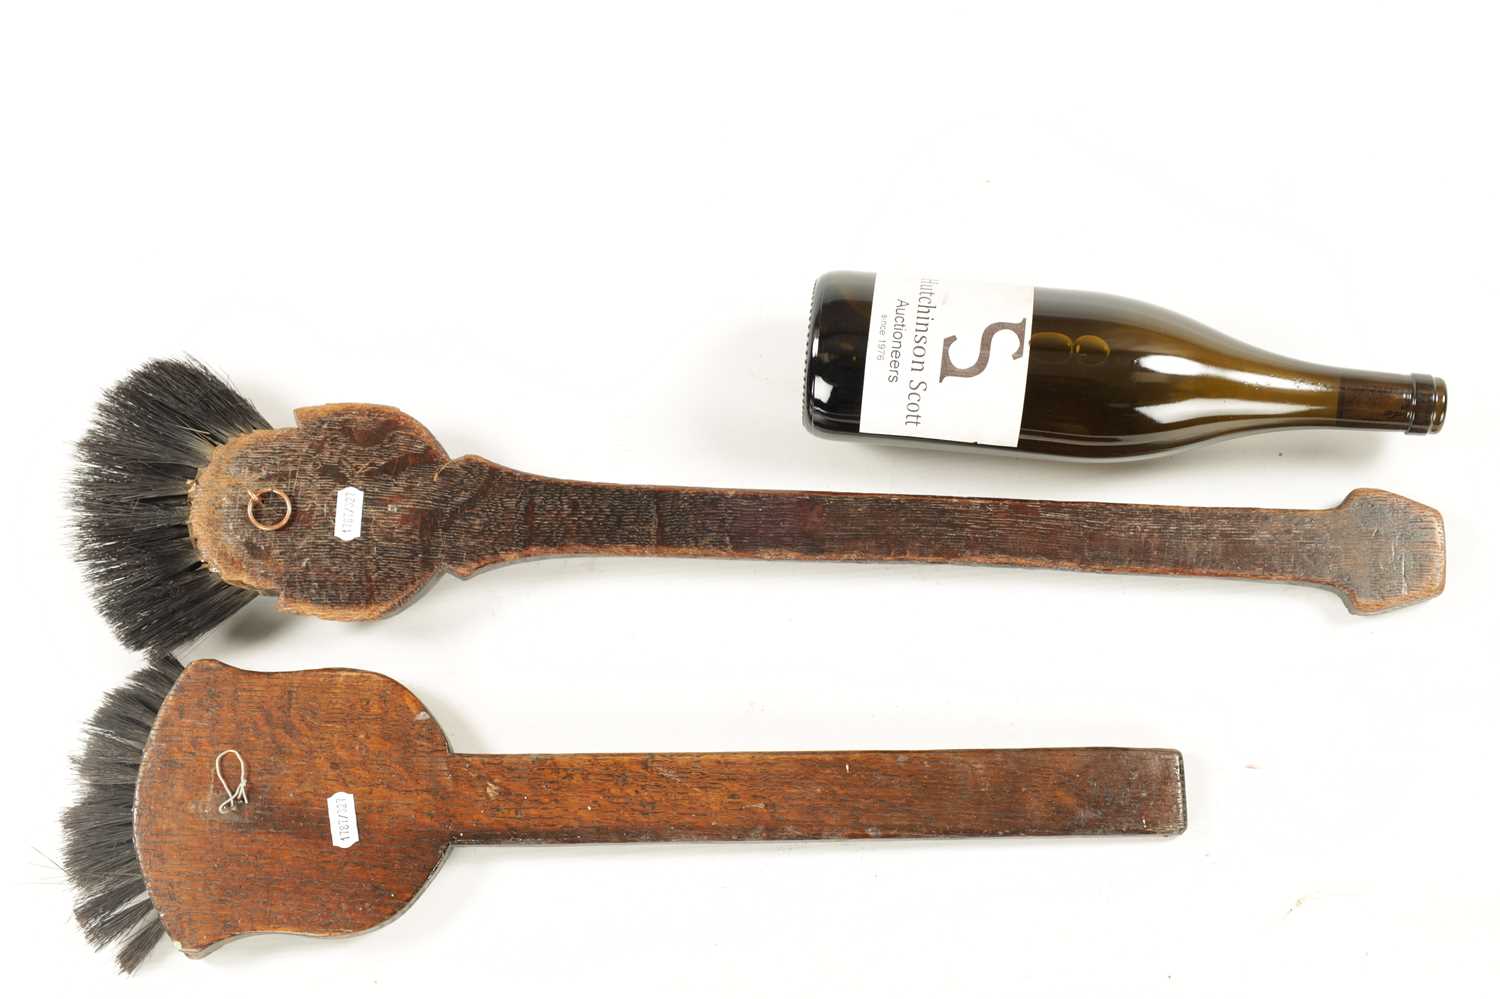 TWO UNUSUAL EARLY 20TH CENTURY CARVED WOOD LONG-HANDLED COMICAL BRUSHES - Image 5 of 5